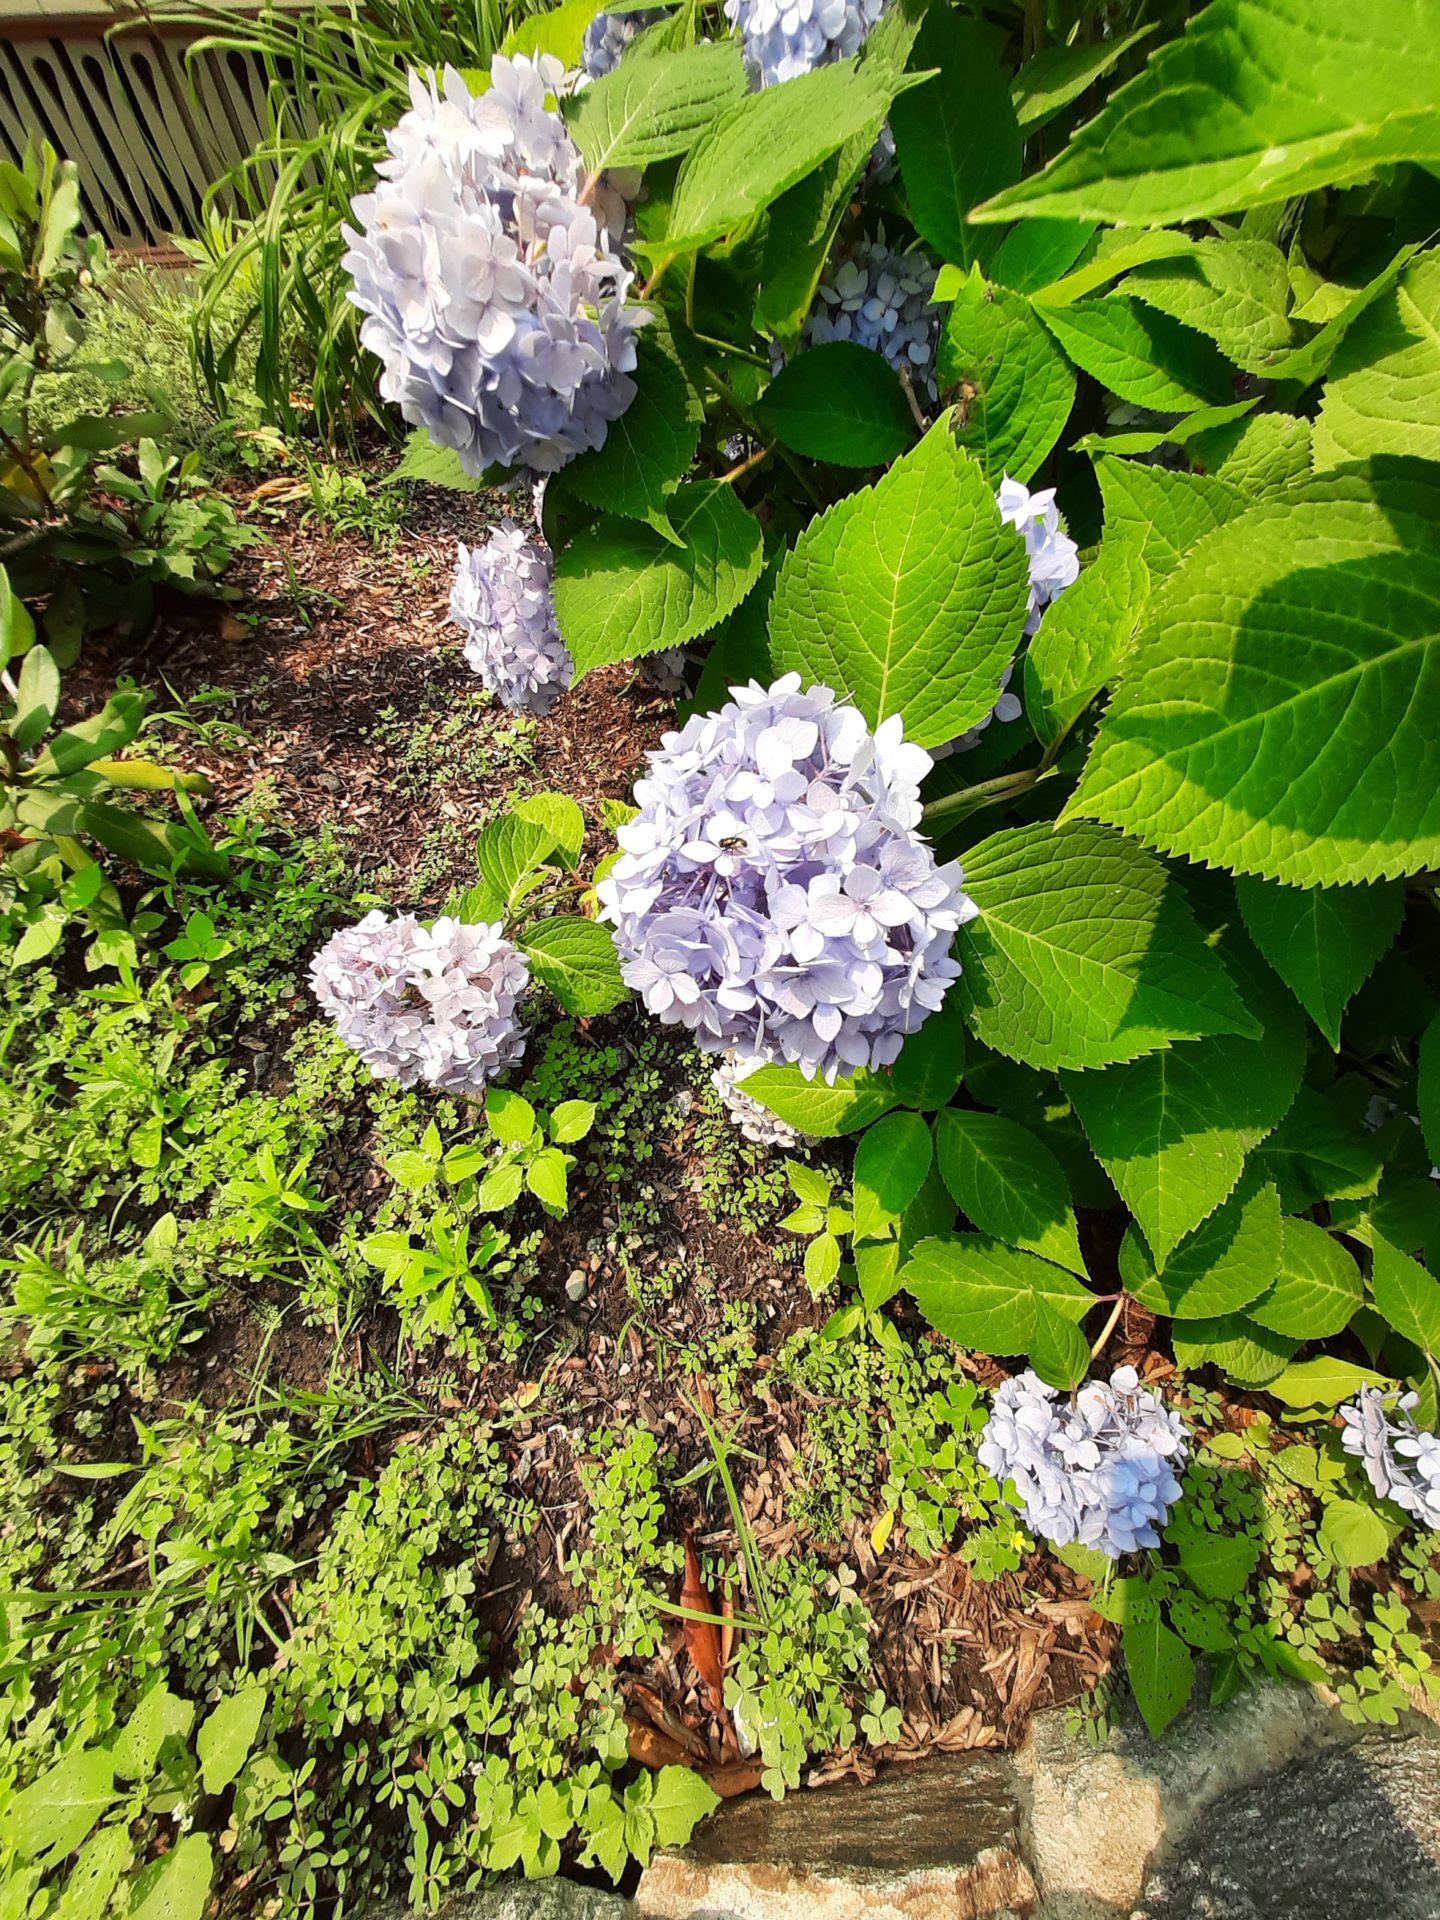 Samsung Galaxy XCover Pro Camera Samples showing a purple flowering plant with green leaves.